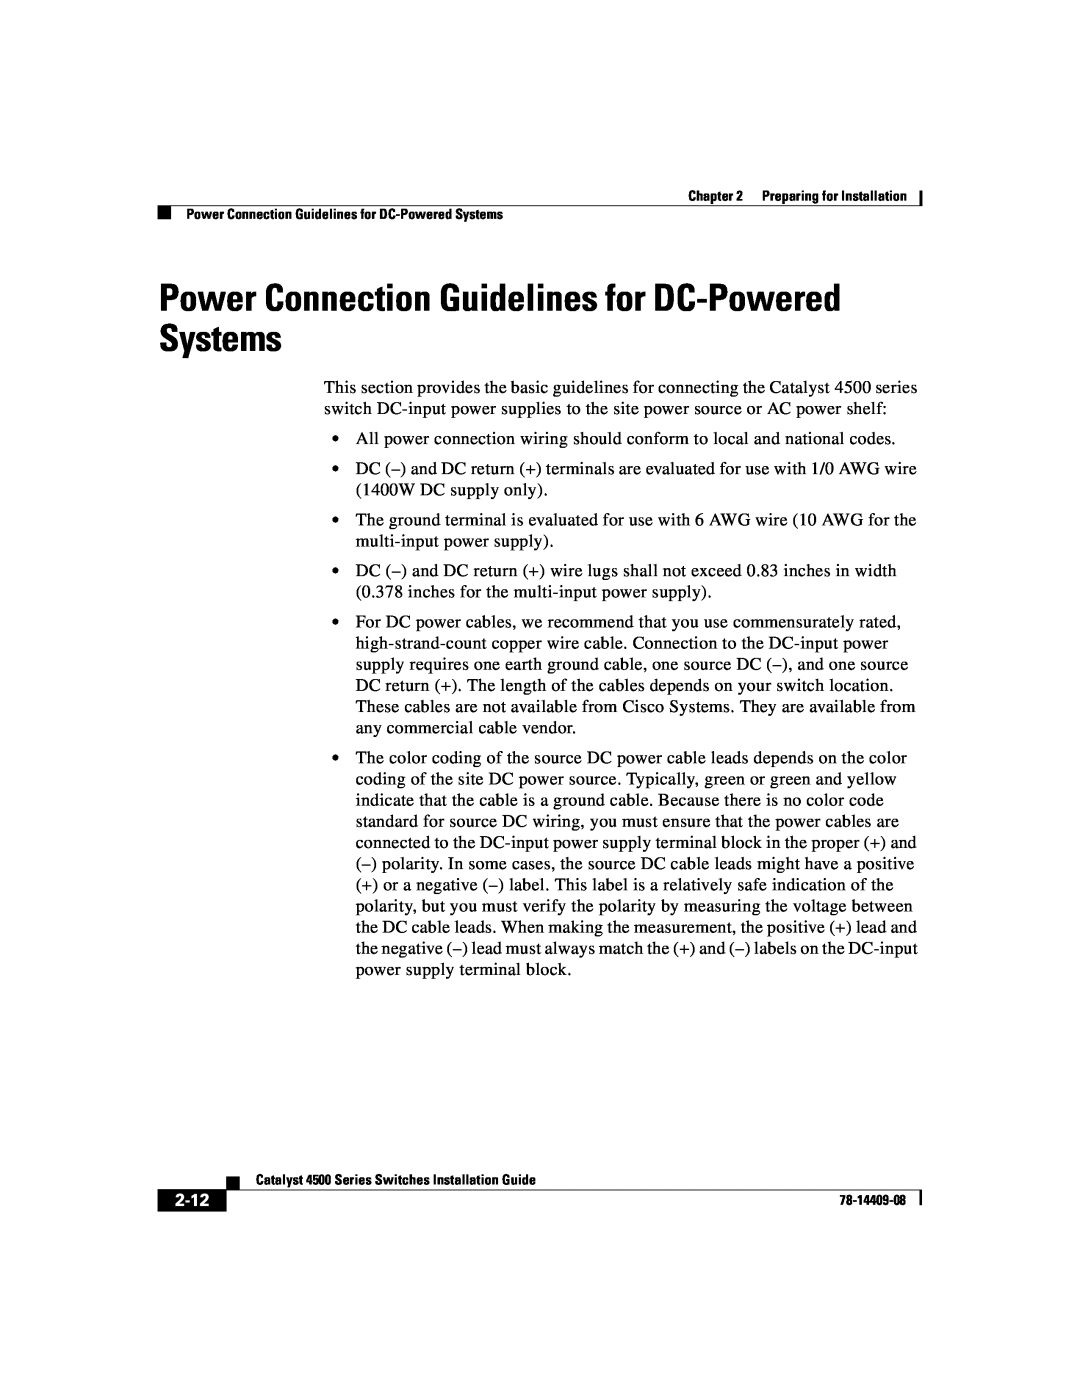 Cisco Systems WSC4500X24XIPB, WSC4500XF32SFP, WSC4500XF16SFP manual Power Connection Guidelines for DC-Powered Systems, 2-12 